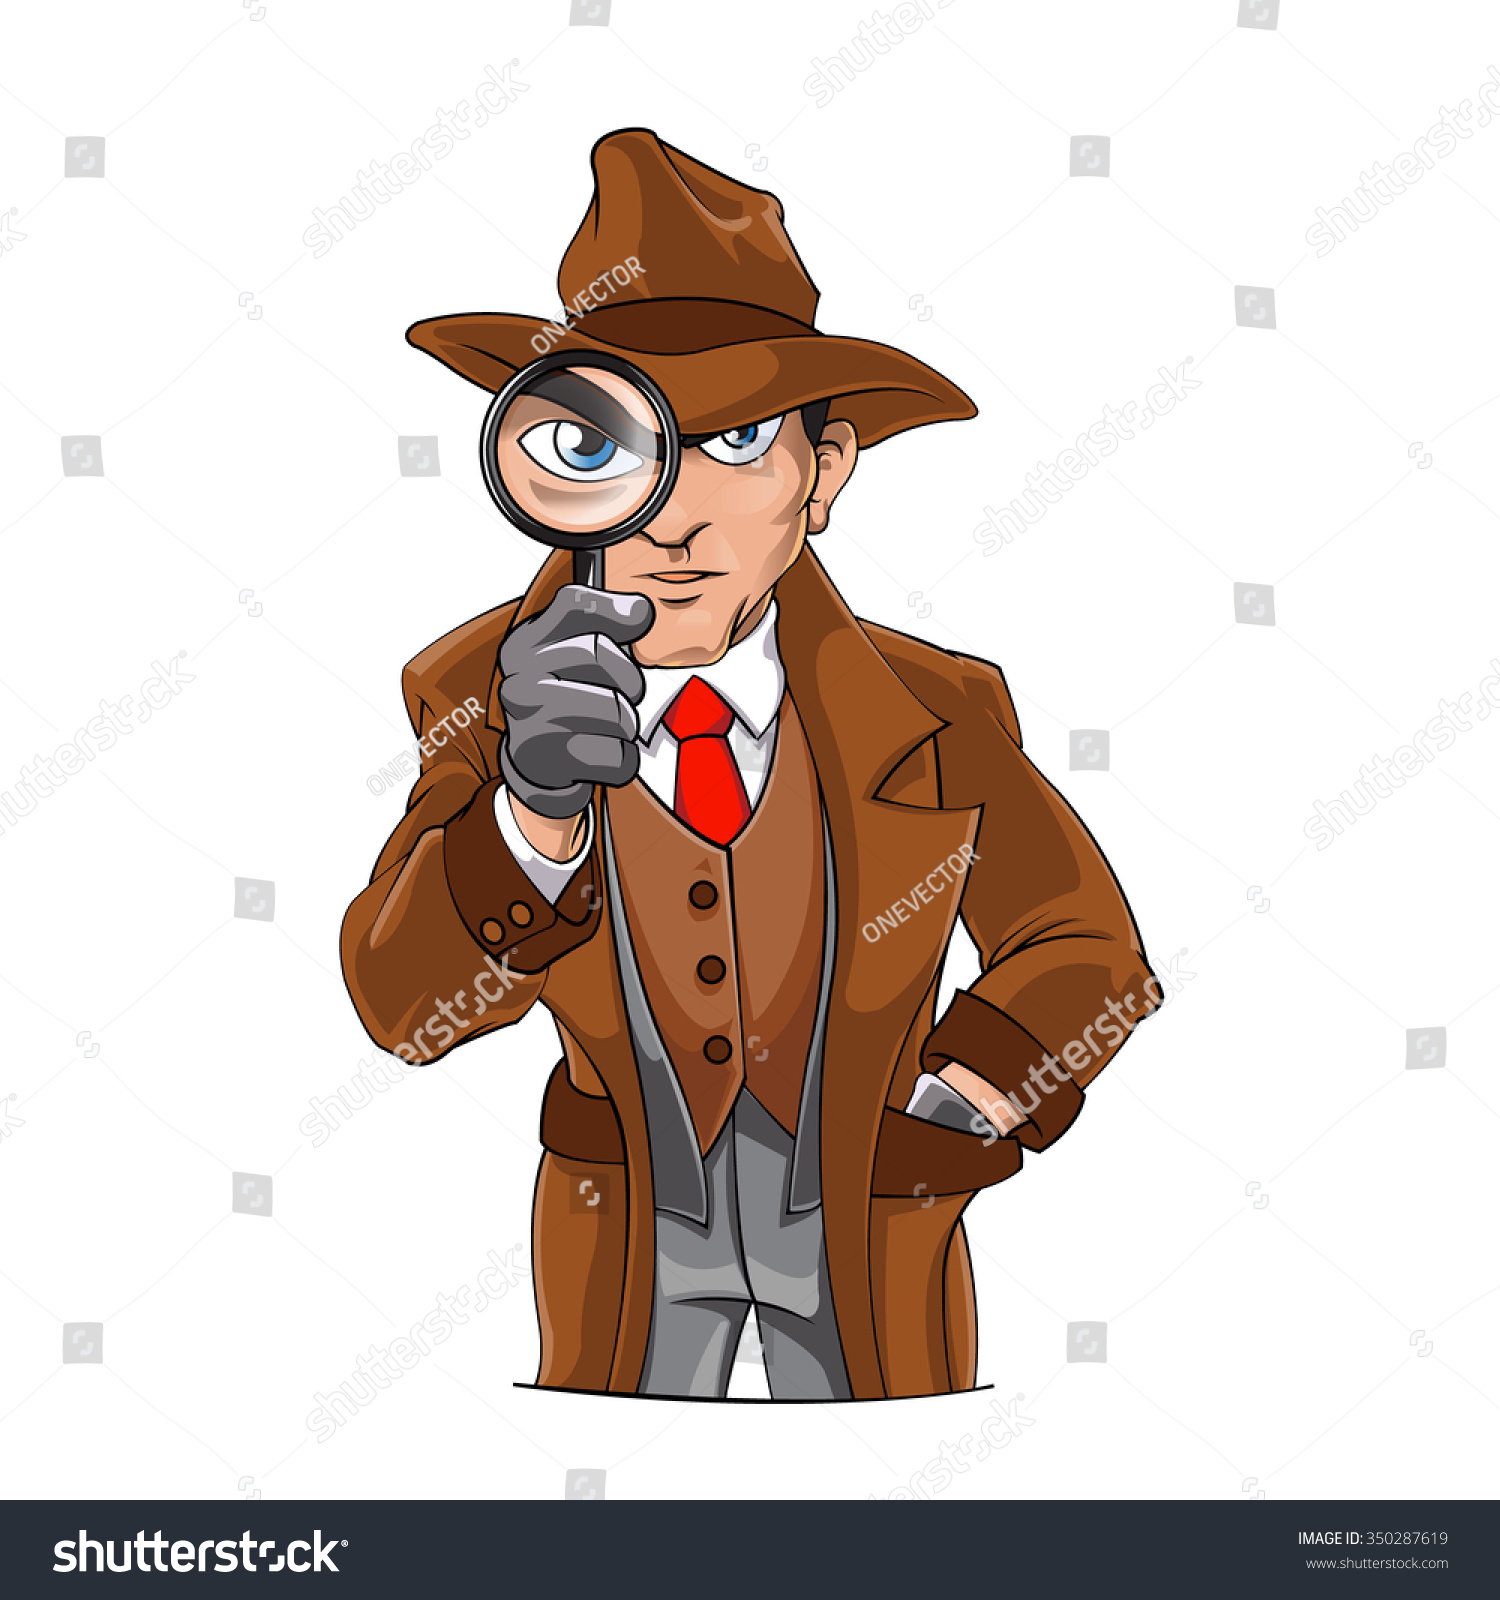 Detective Looking Through Magnifying Glass Stock Vector Royalty Free 350287619 Shutterstock 